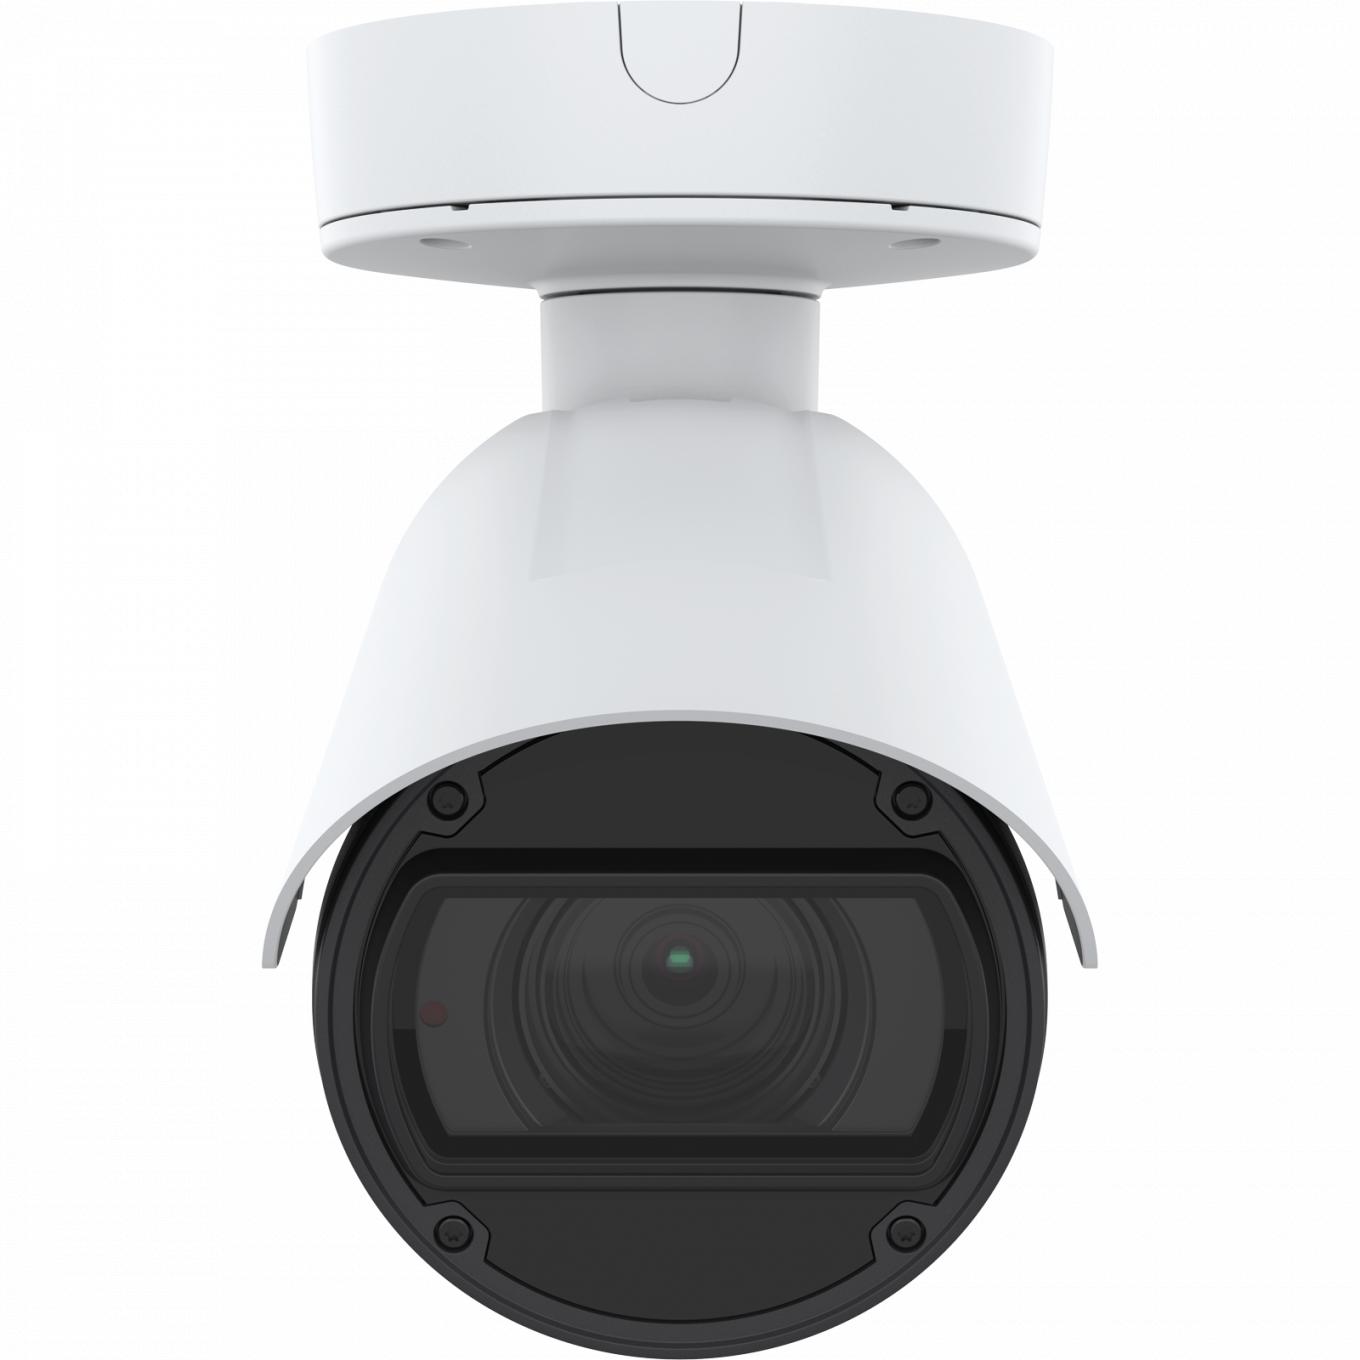 AXIS Q1786-LE IP Camera has OptimizedIR. The product is viewed from its front. 